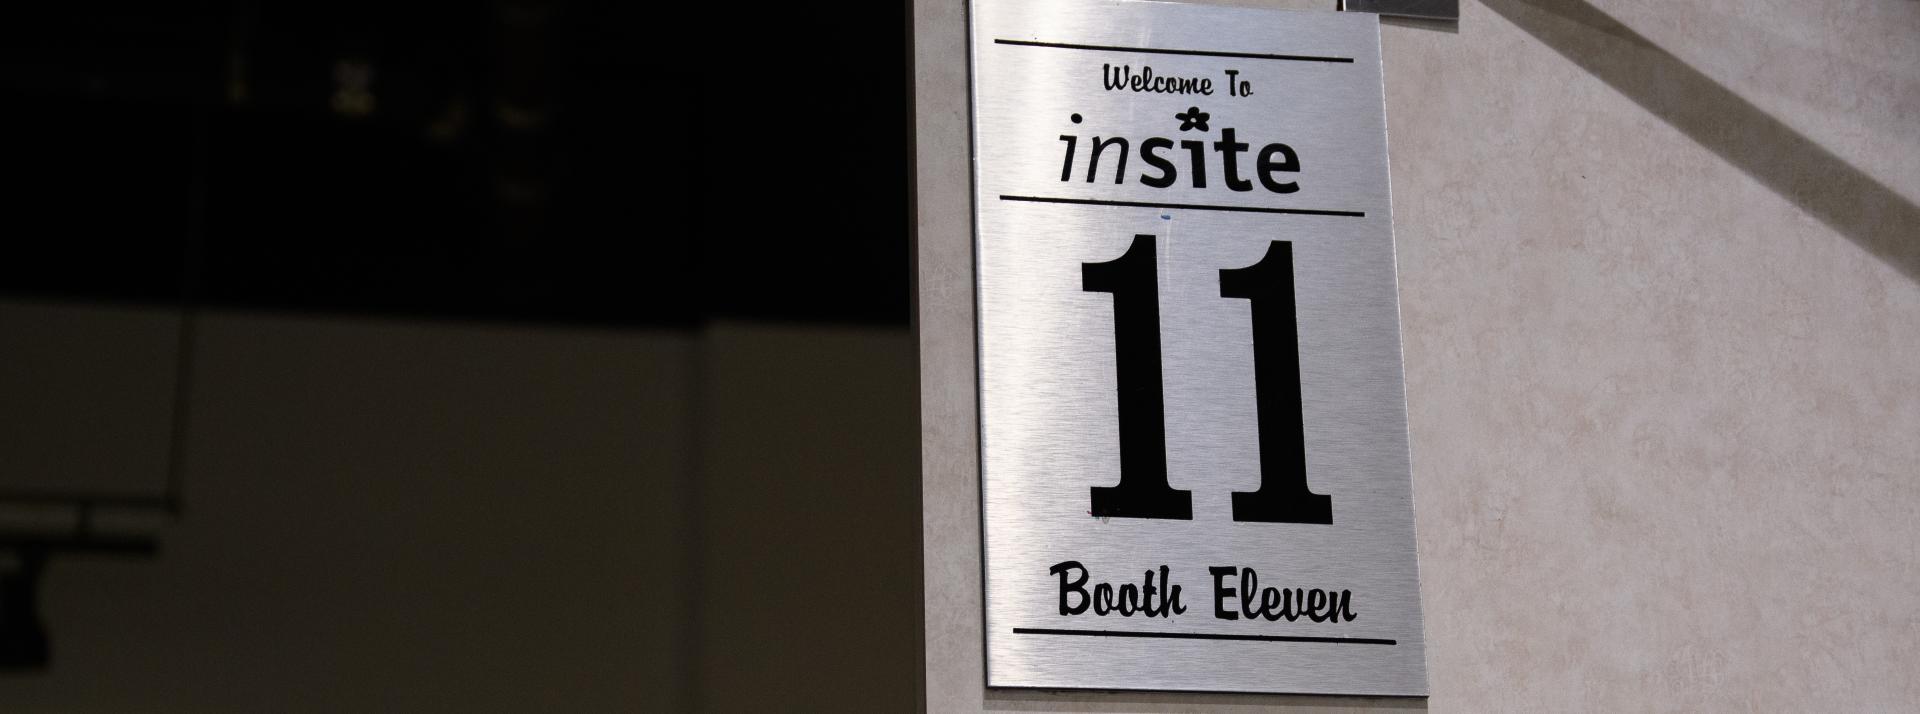 A silver sign that says Welcome to Insite booth 11